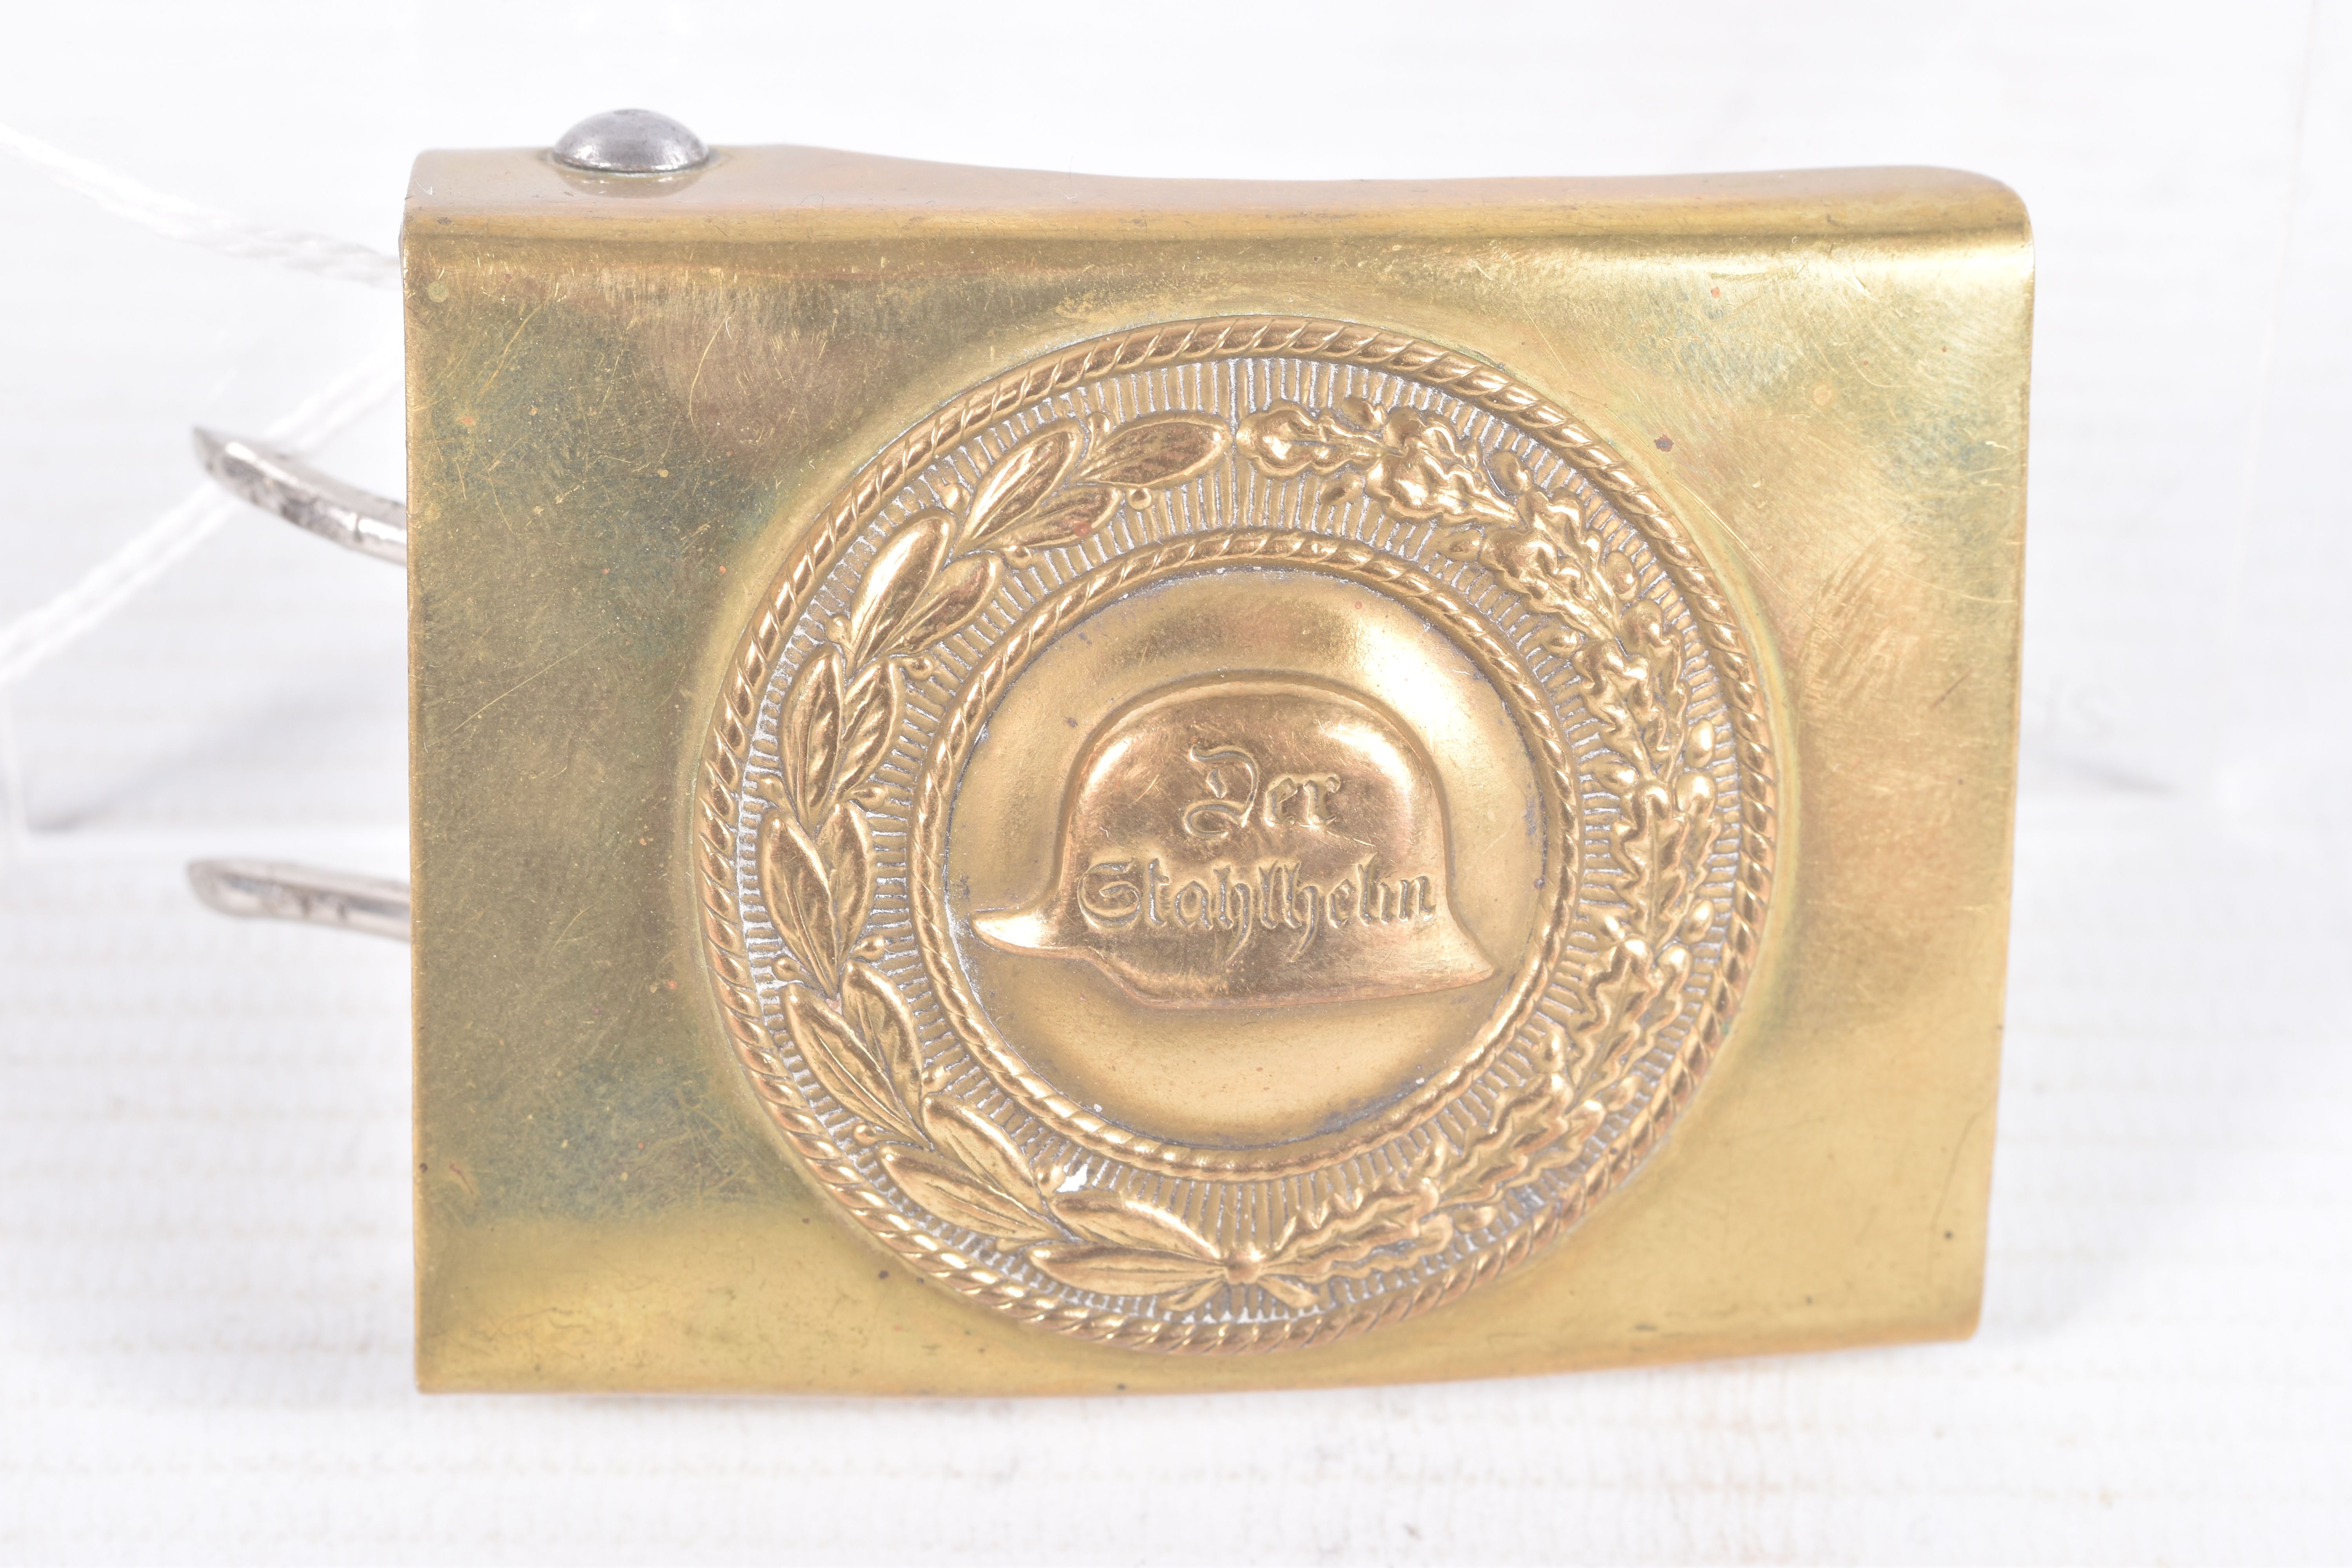 A GERMAN DER STAHLHELM BELT BUCKLE, this is a WWI veterans belt buckle and is commonly known as